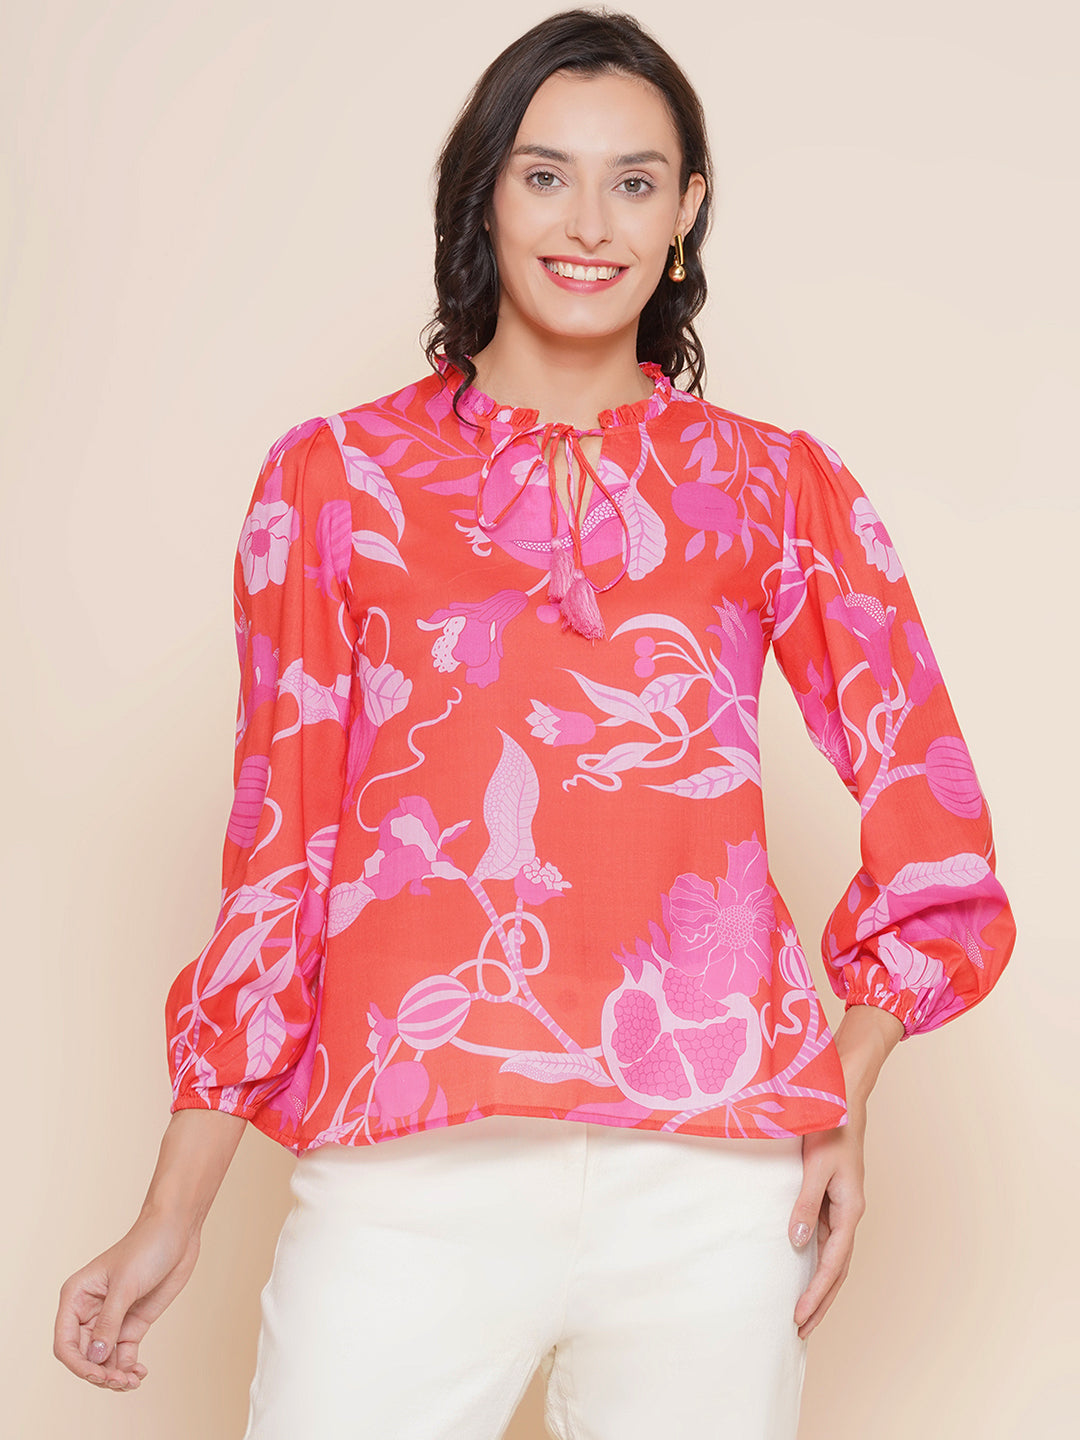 Bhama Couture Red Floral Printed Top